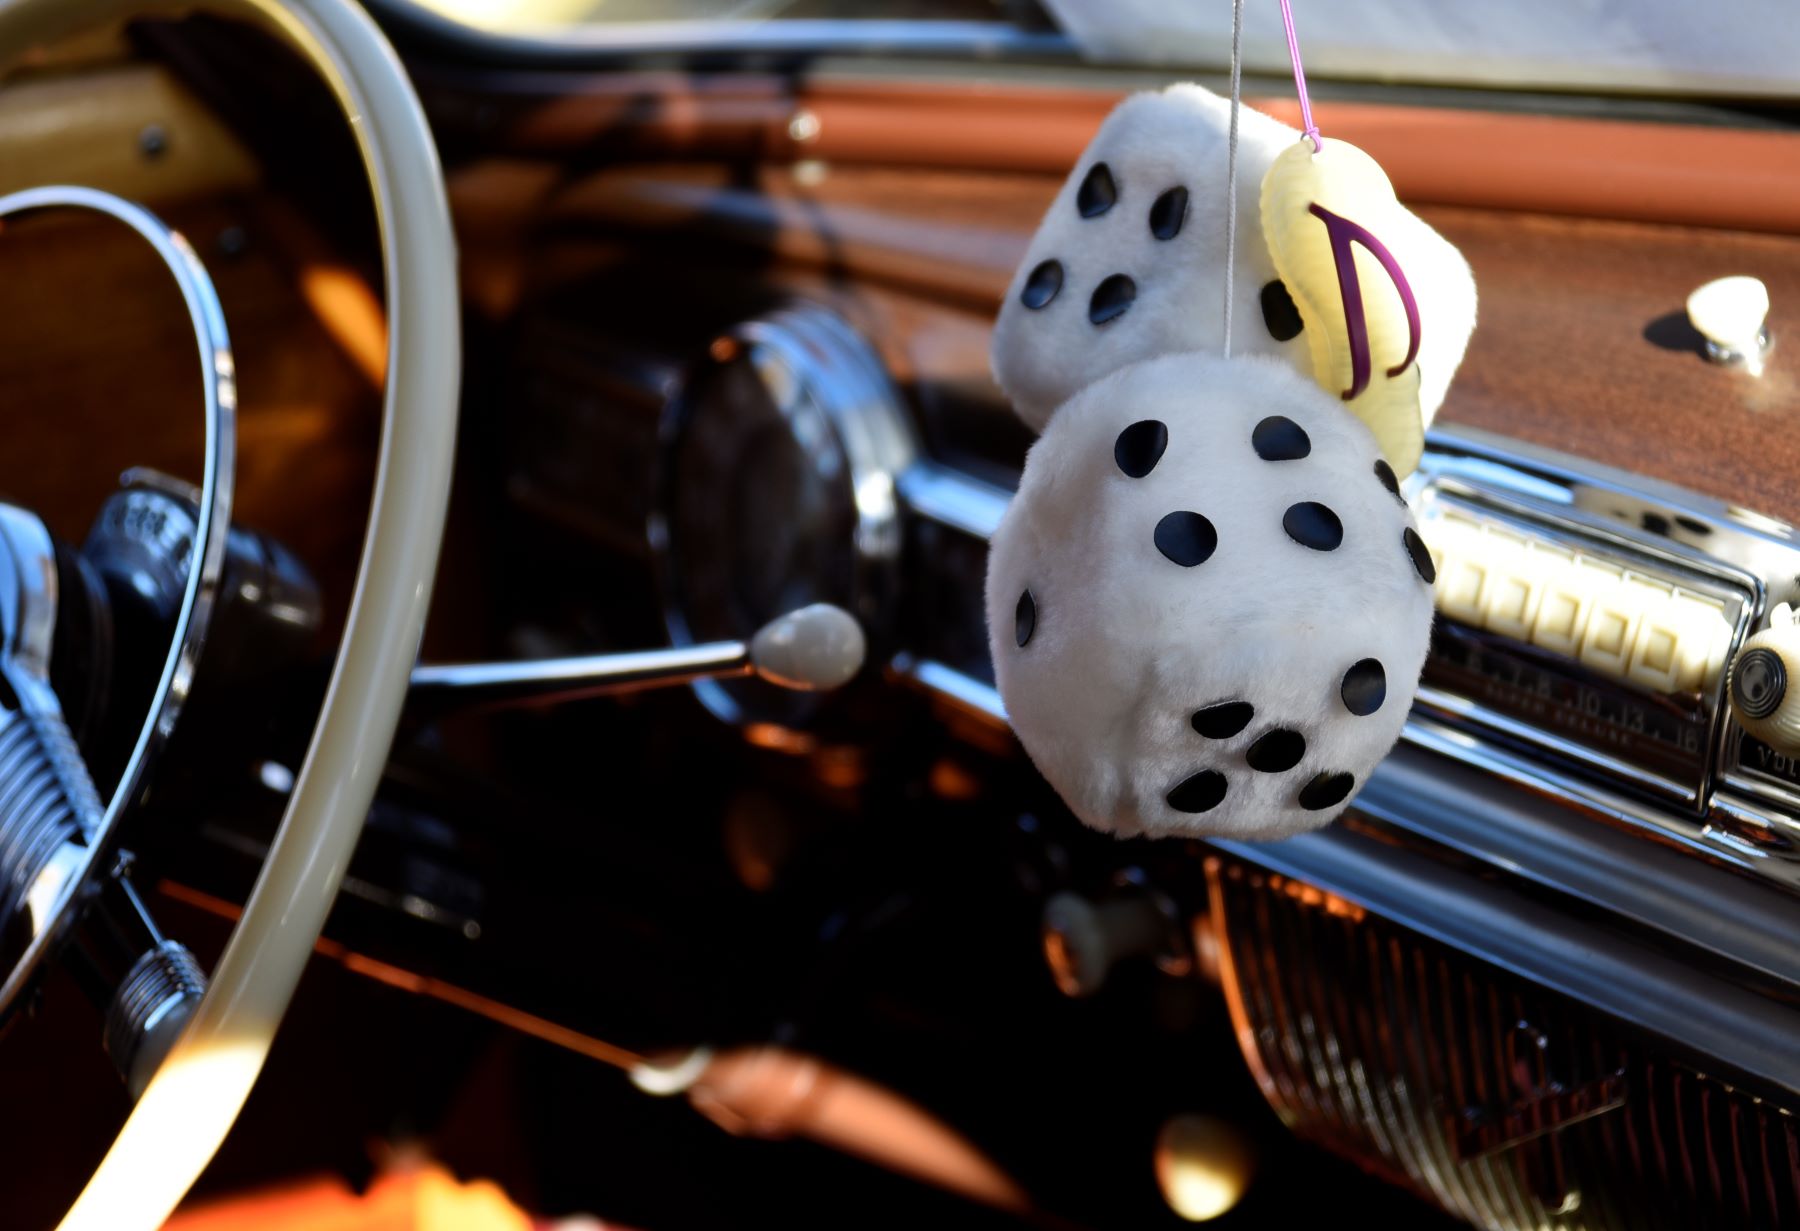 A pair of fuzzy dice hanging from a rearview mirror in the cabin of a classic car on display in Santa Fe, New Mexico